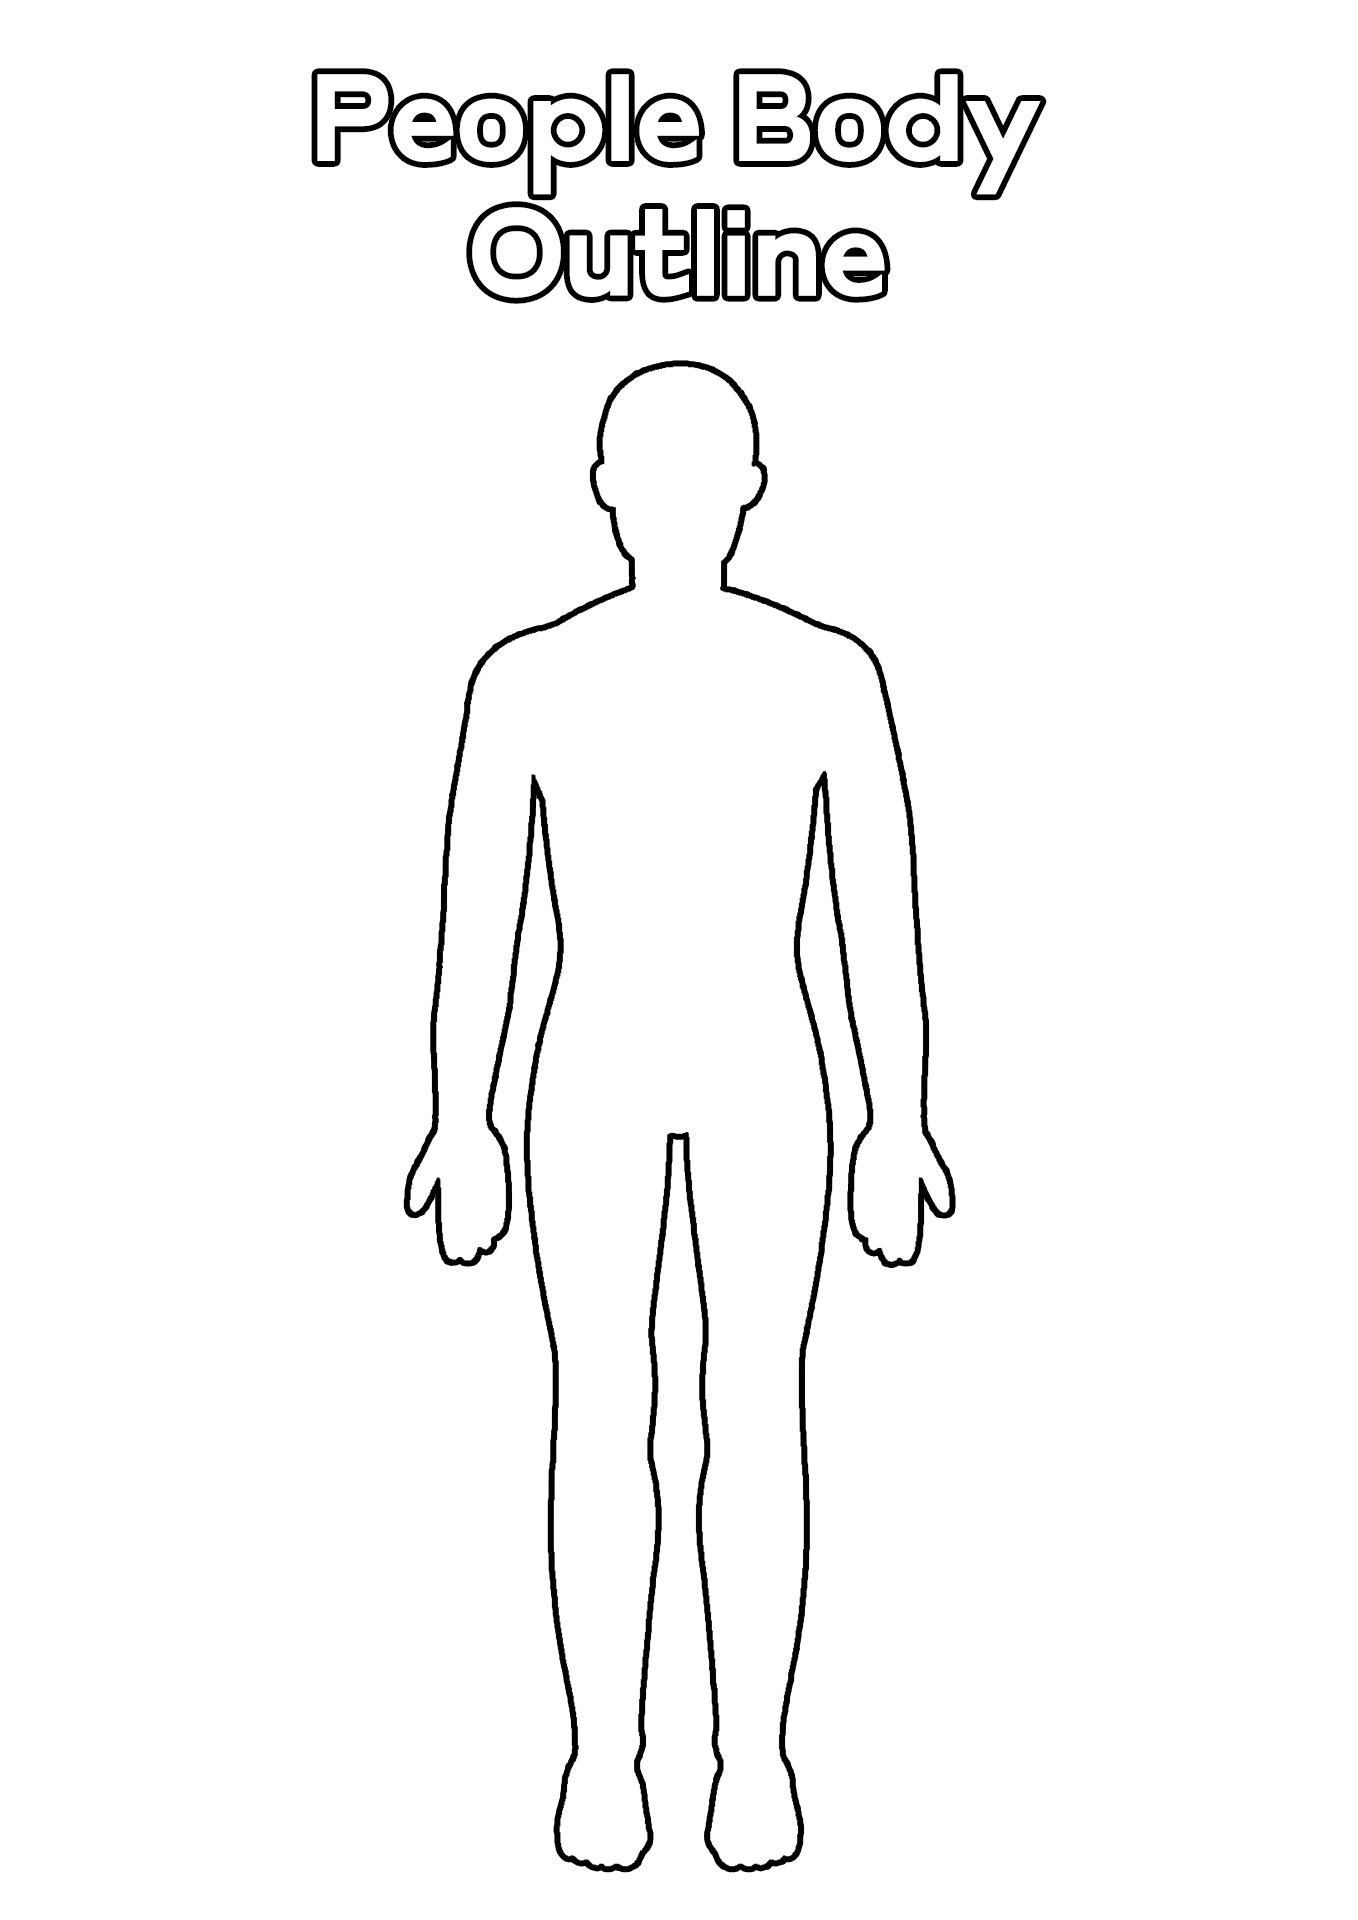 People Body Outline